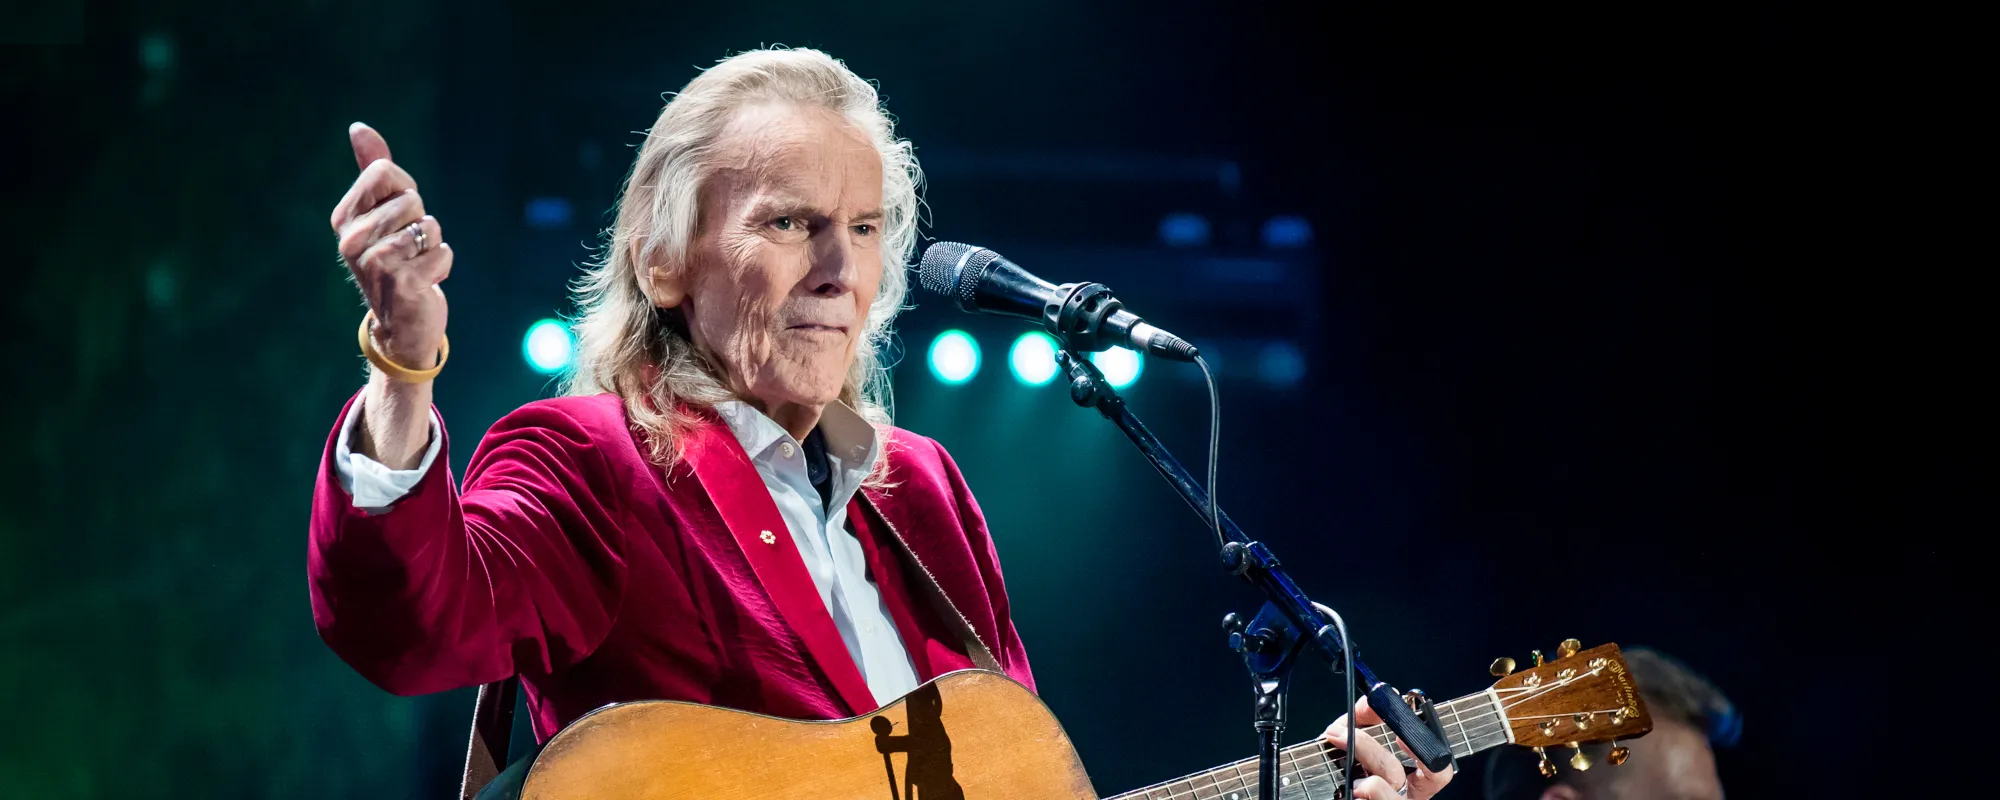 The Heartbreaking Meaning Behind Gordon Lightfoot’s “If You Could Read My Mind”